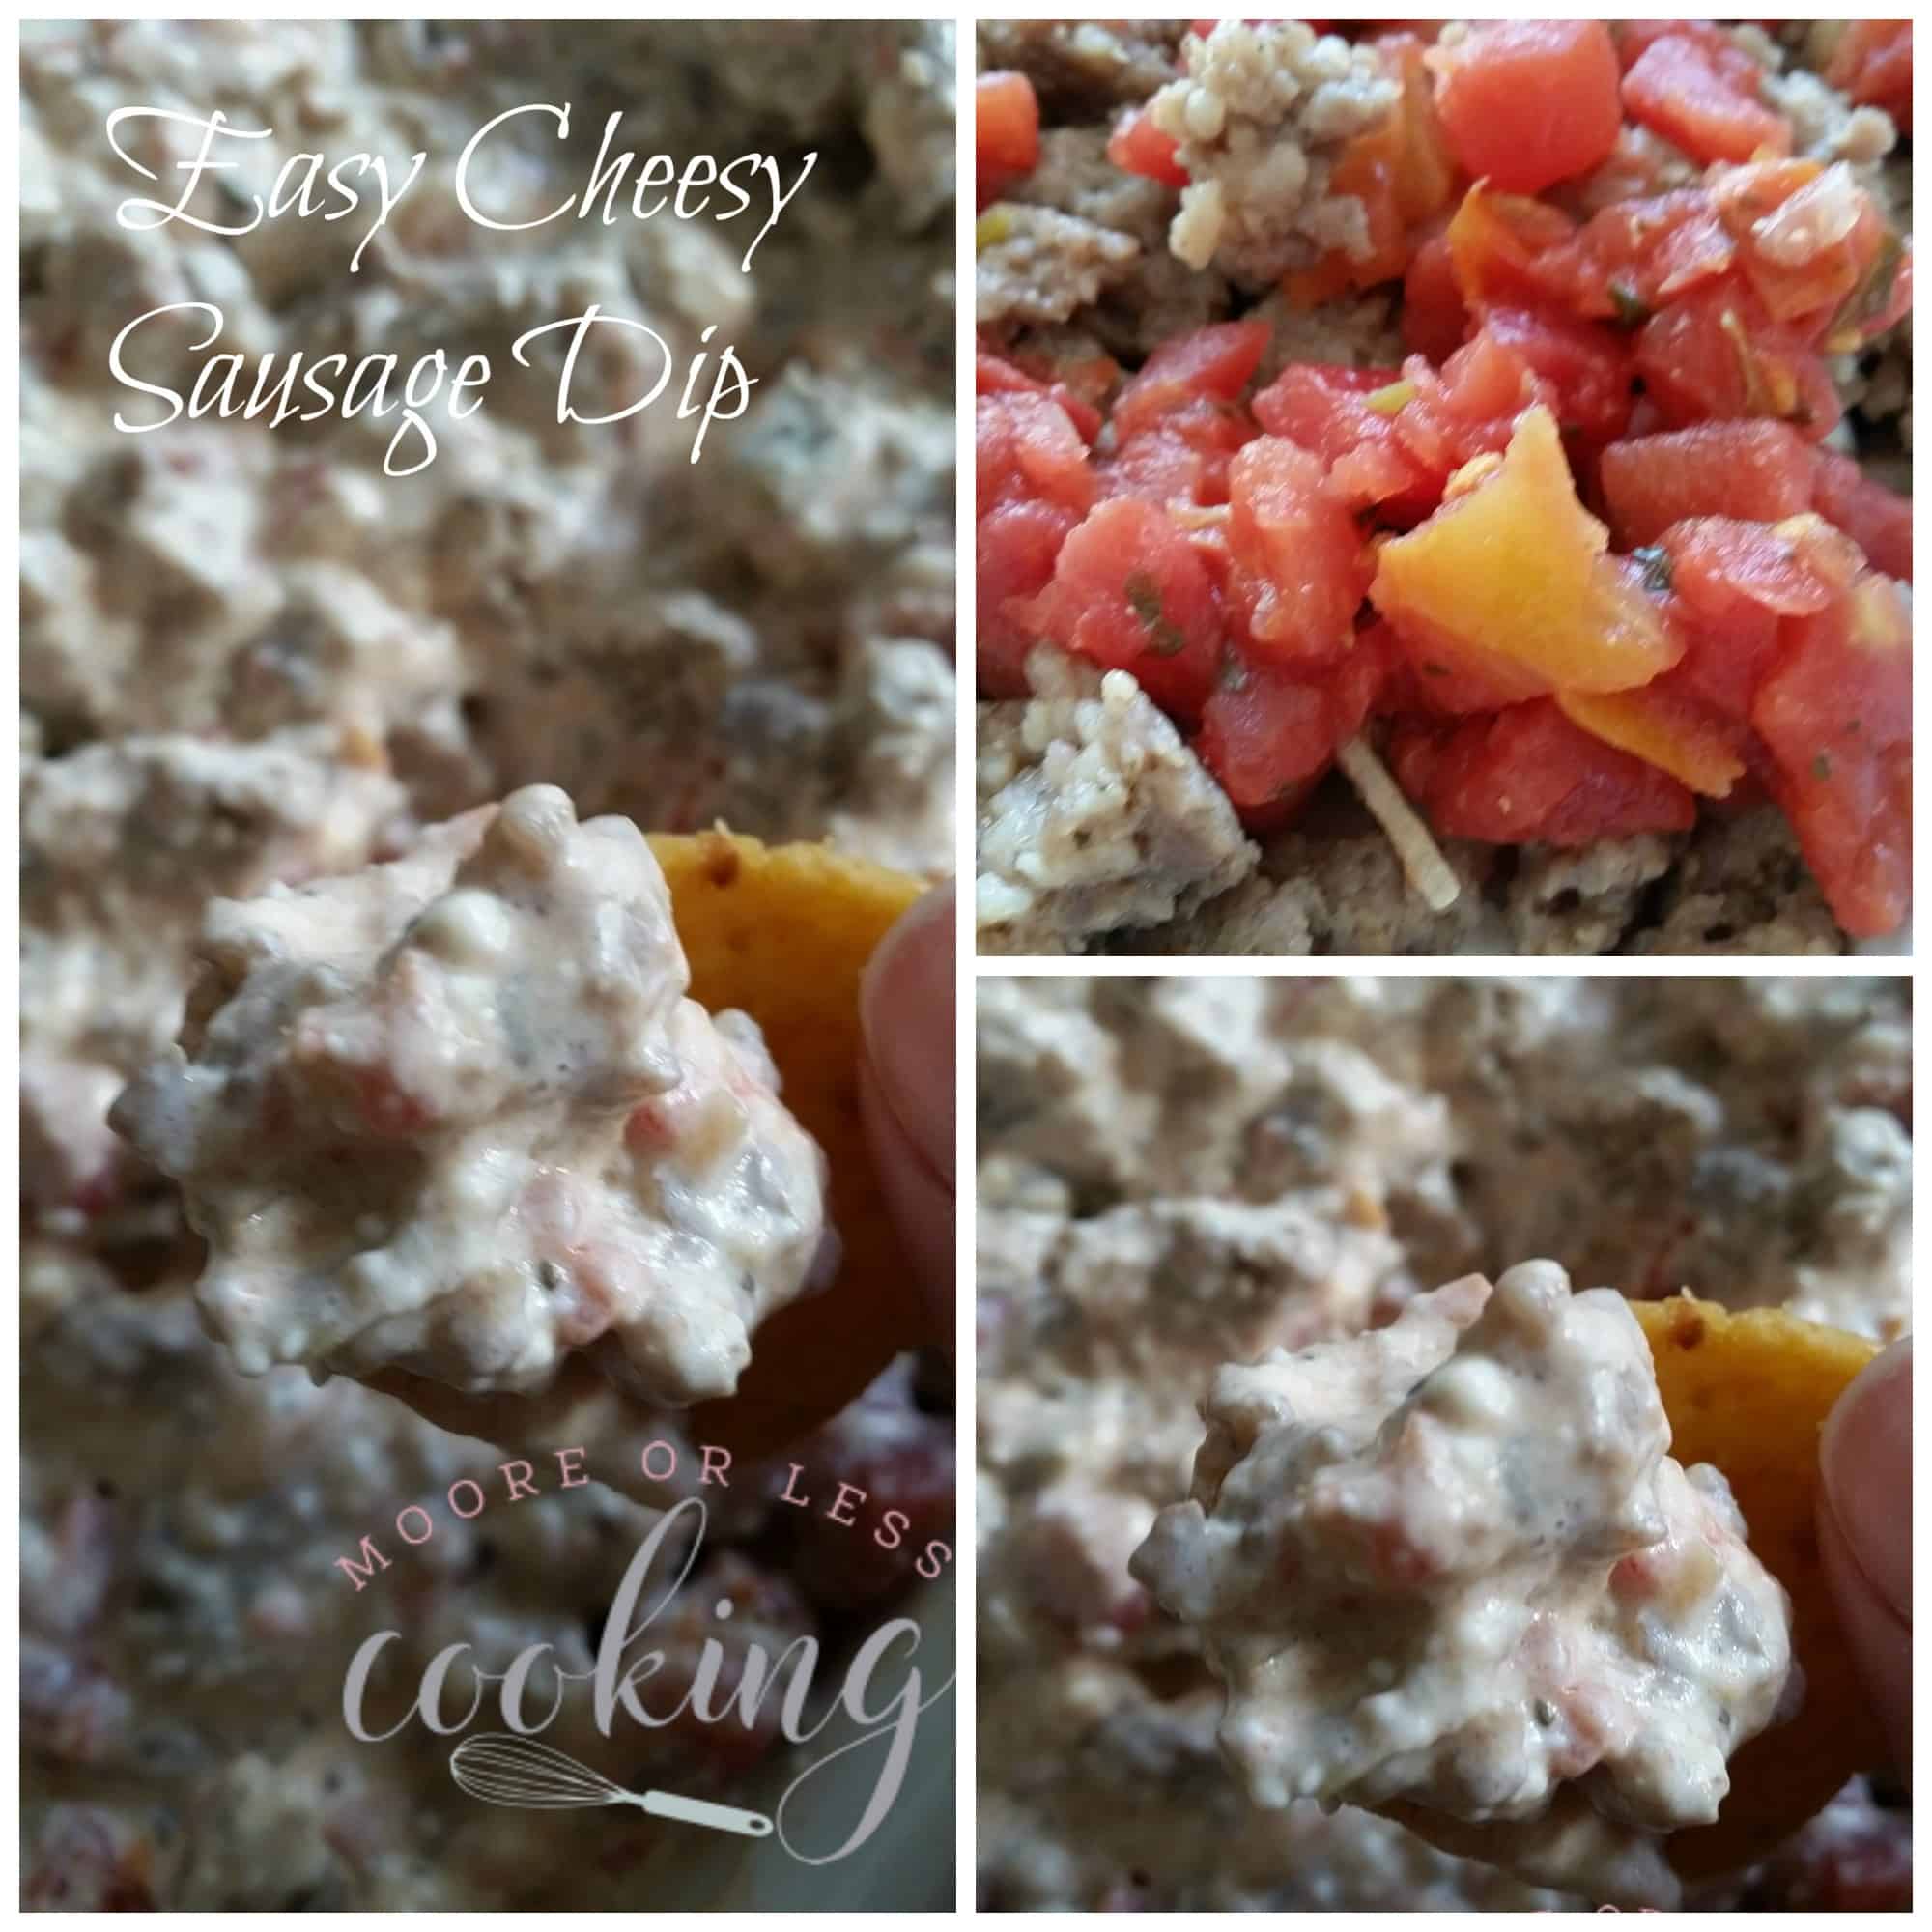 Easy Cheesy Sausage Dip